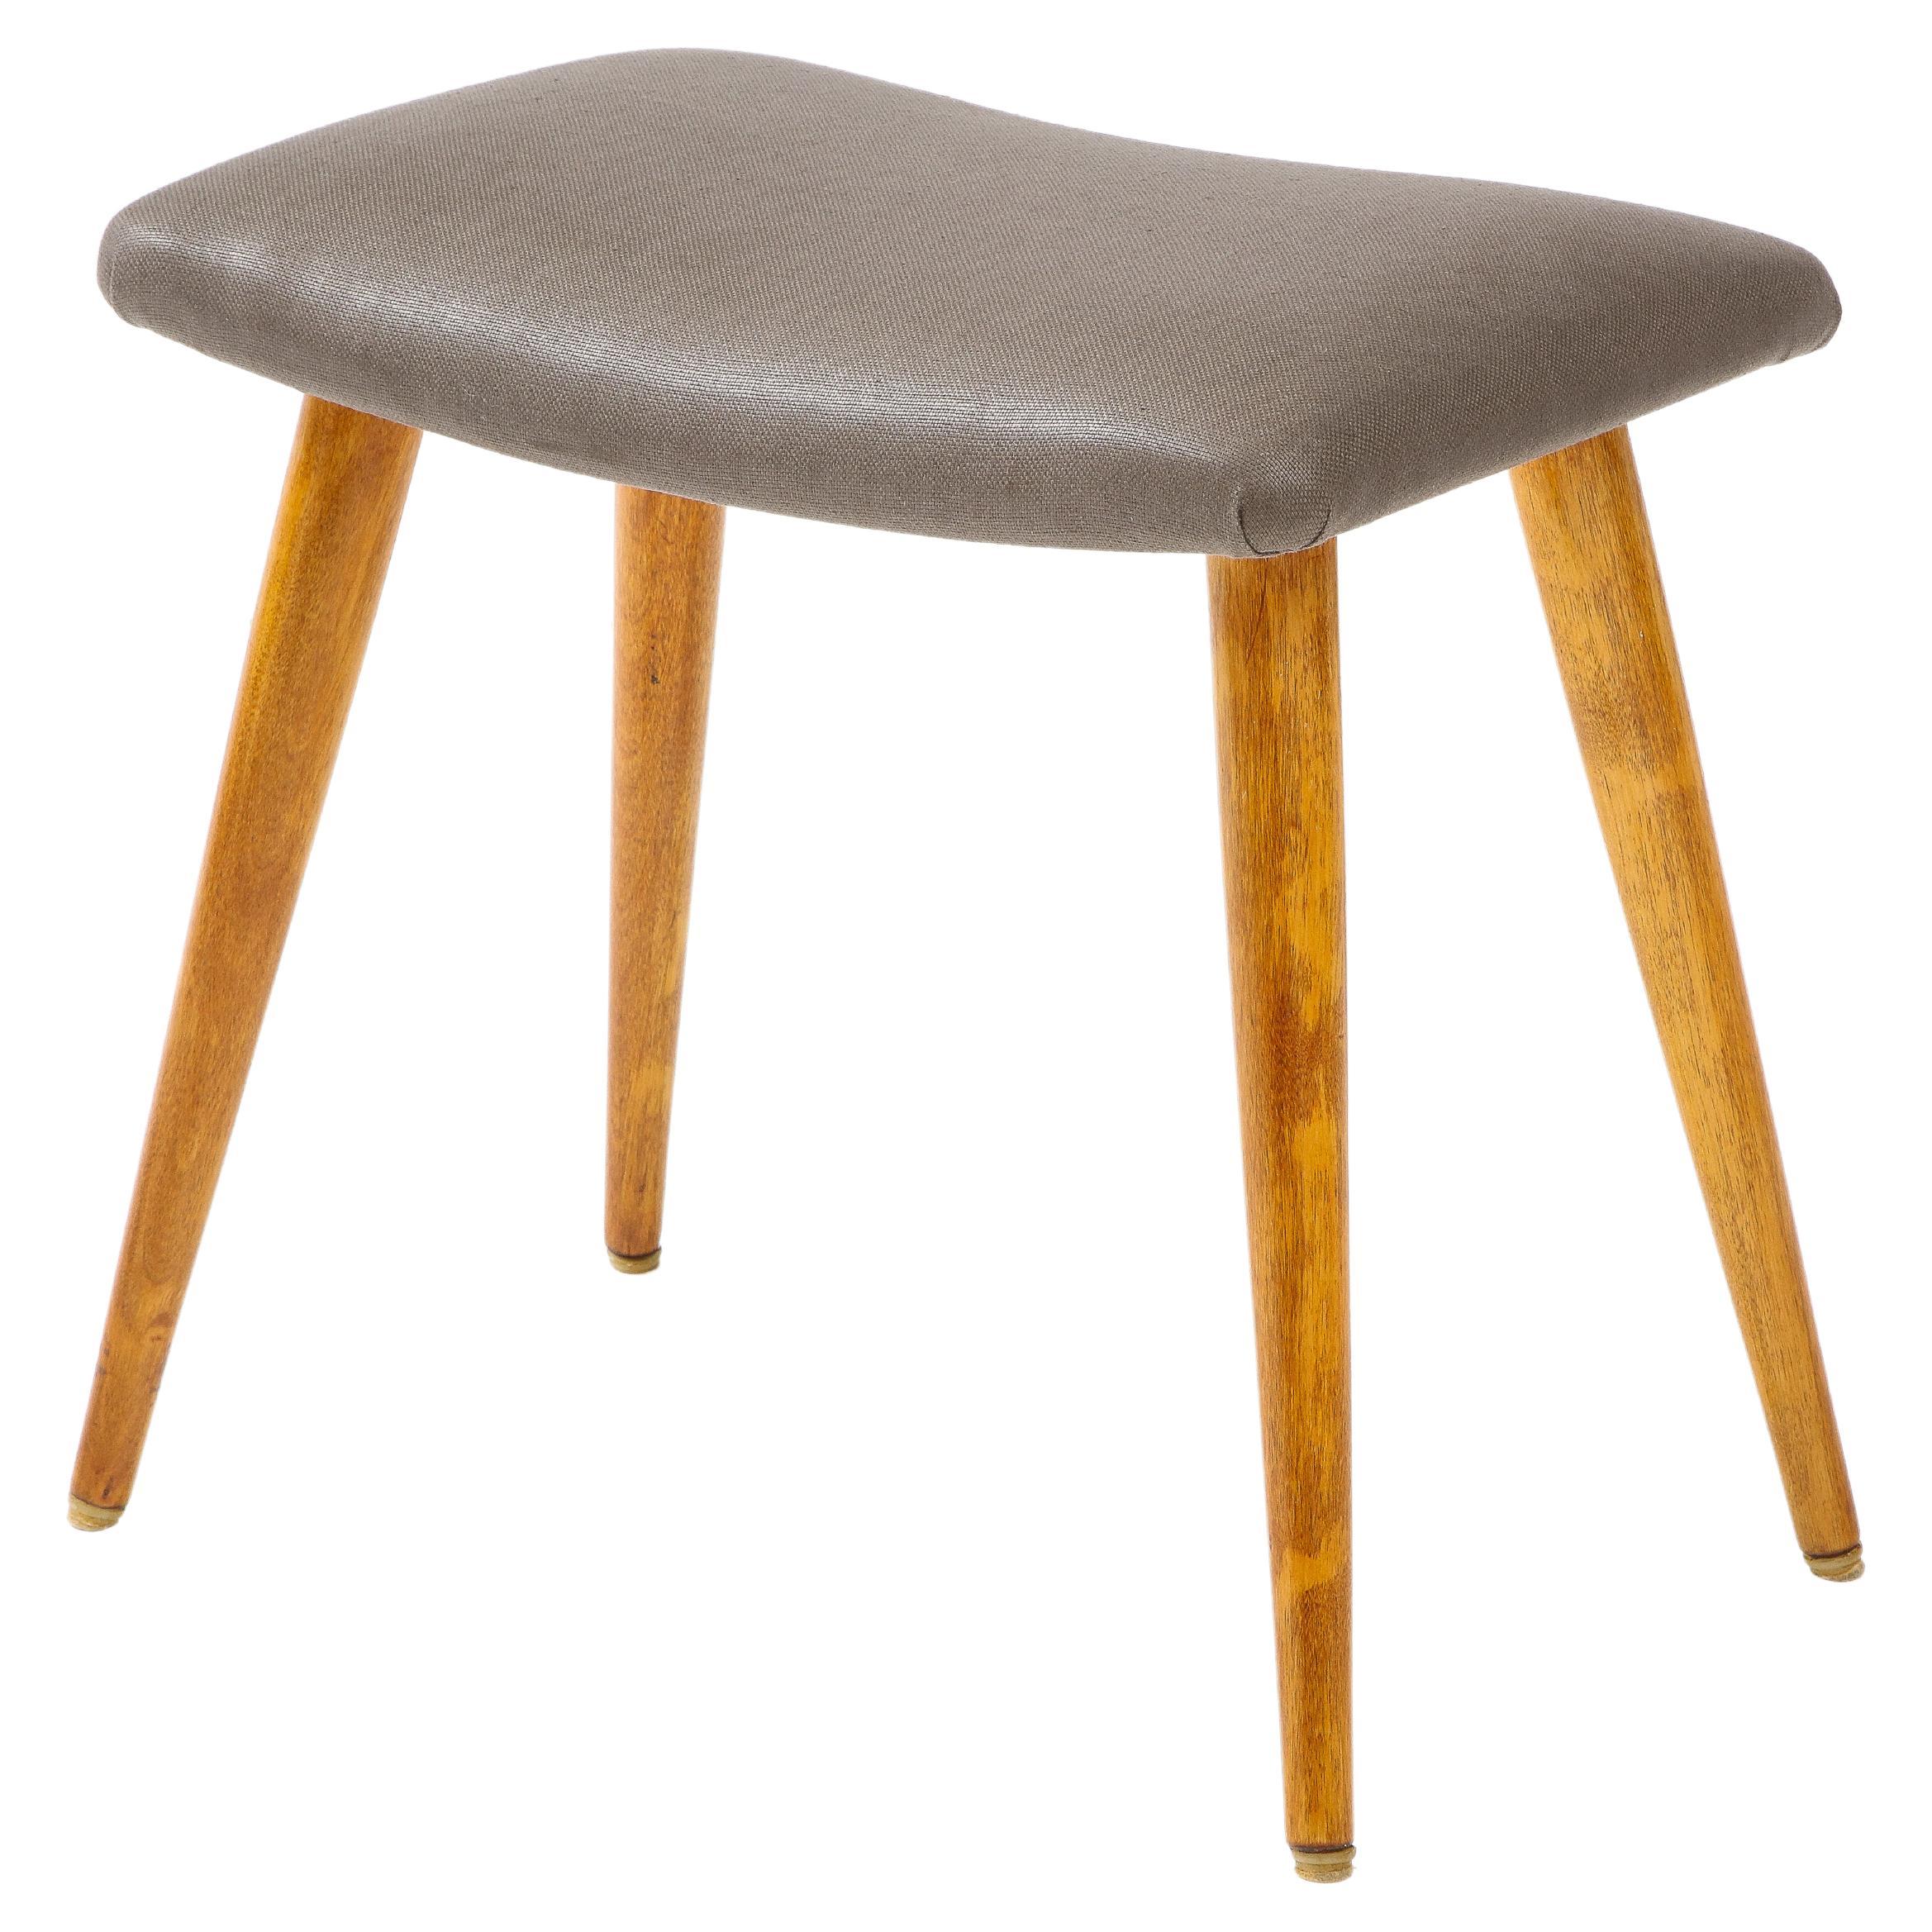 Swedish Birch and Upholstered Stool, Ca 1940s For Sale